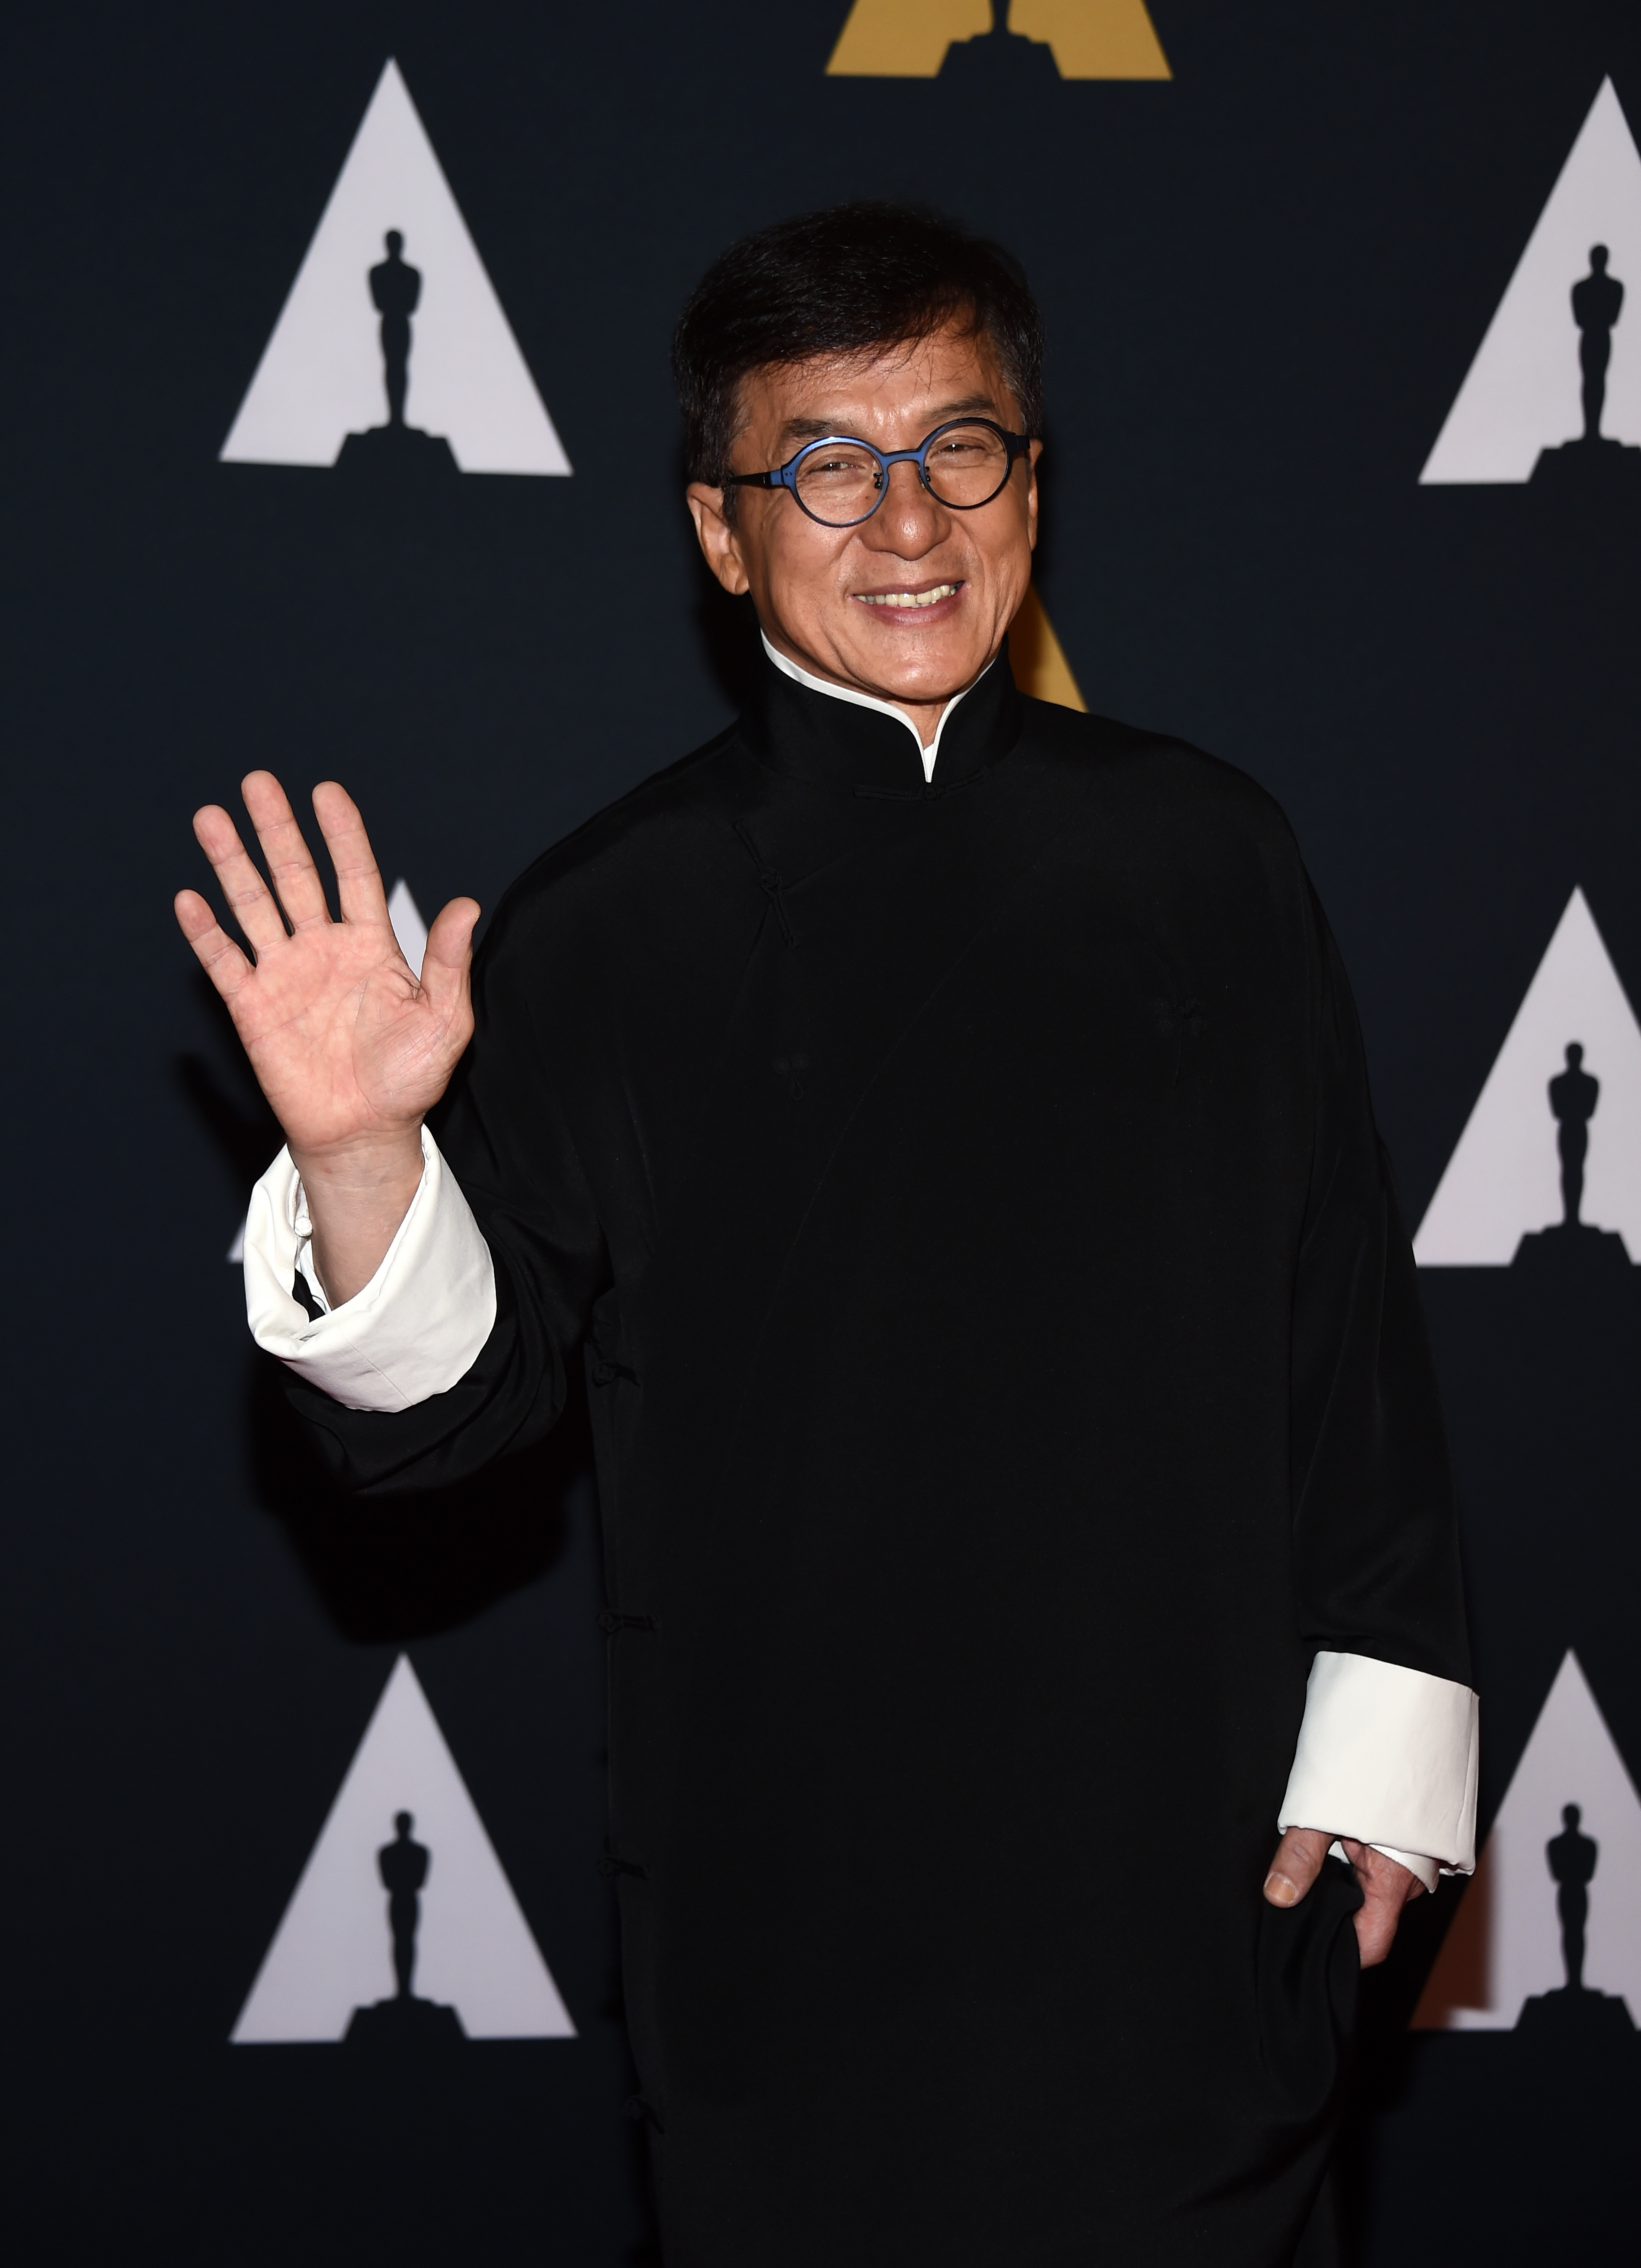 Jackie Chan at the 8th Annual Governors Awards in Hollywood, California on November 12, 2016 | Source: Getty Images